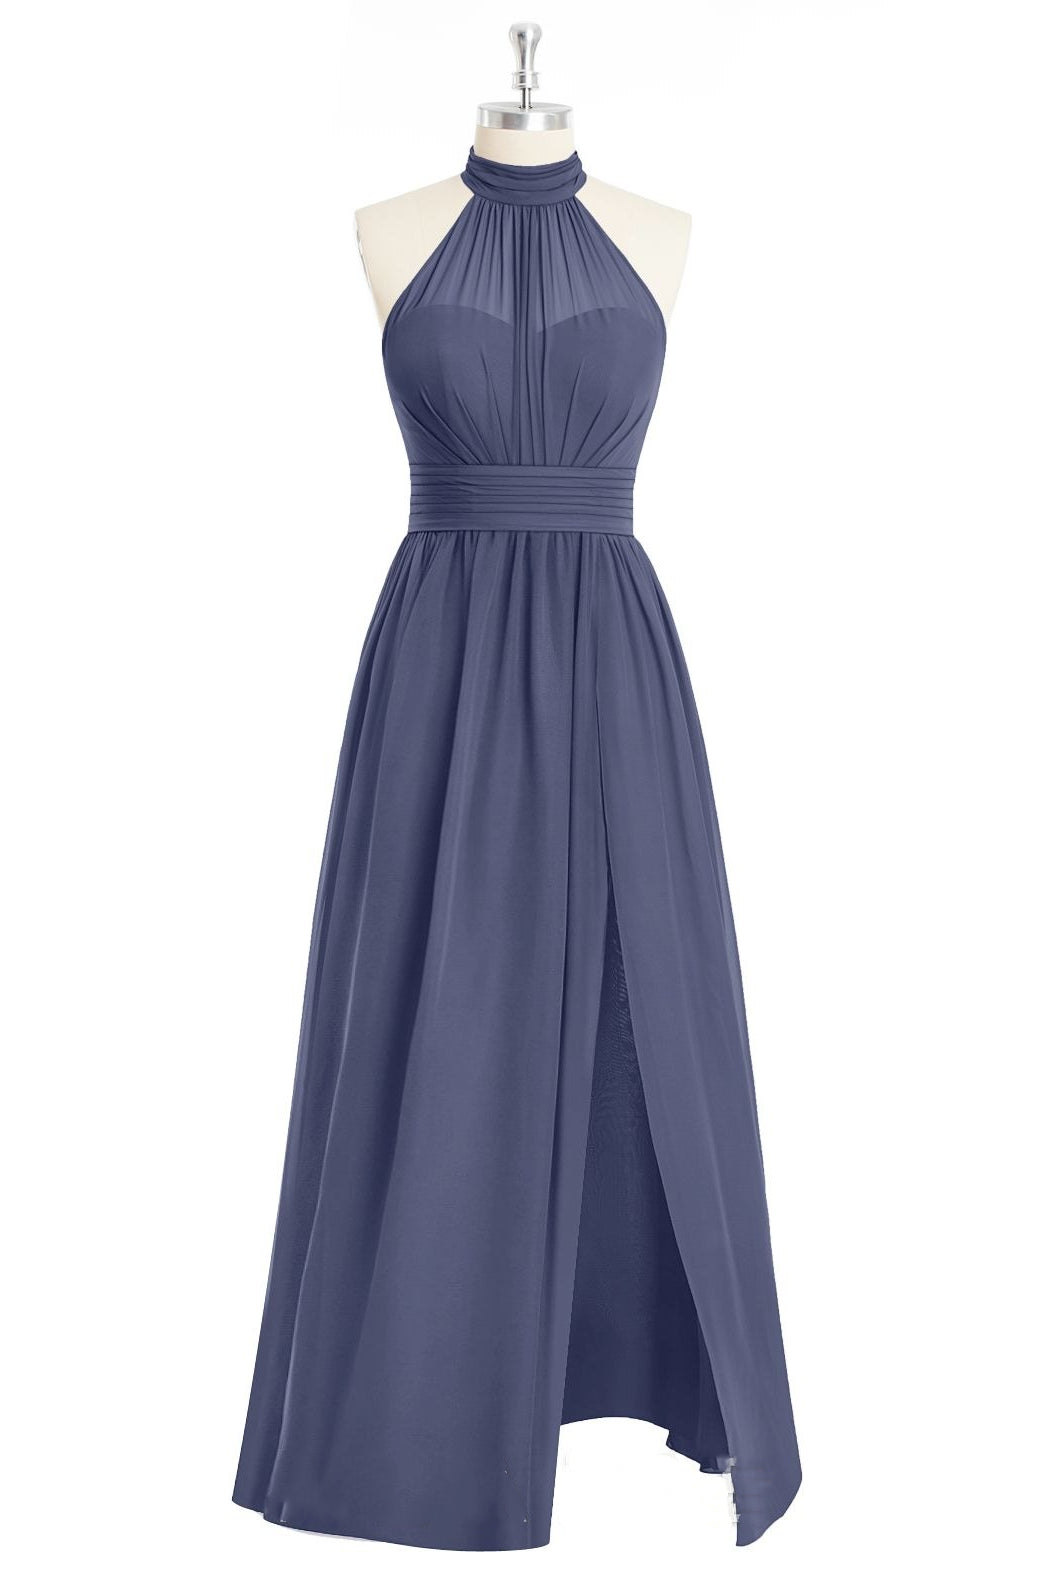 Navy Blue Halter Bow Tie A-line Chiffon Long Bridesmaid Dress with Slit